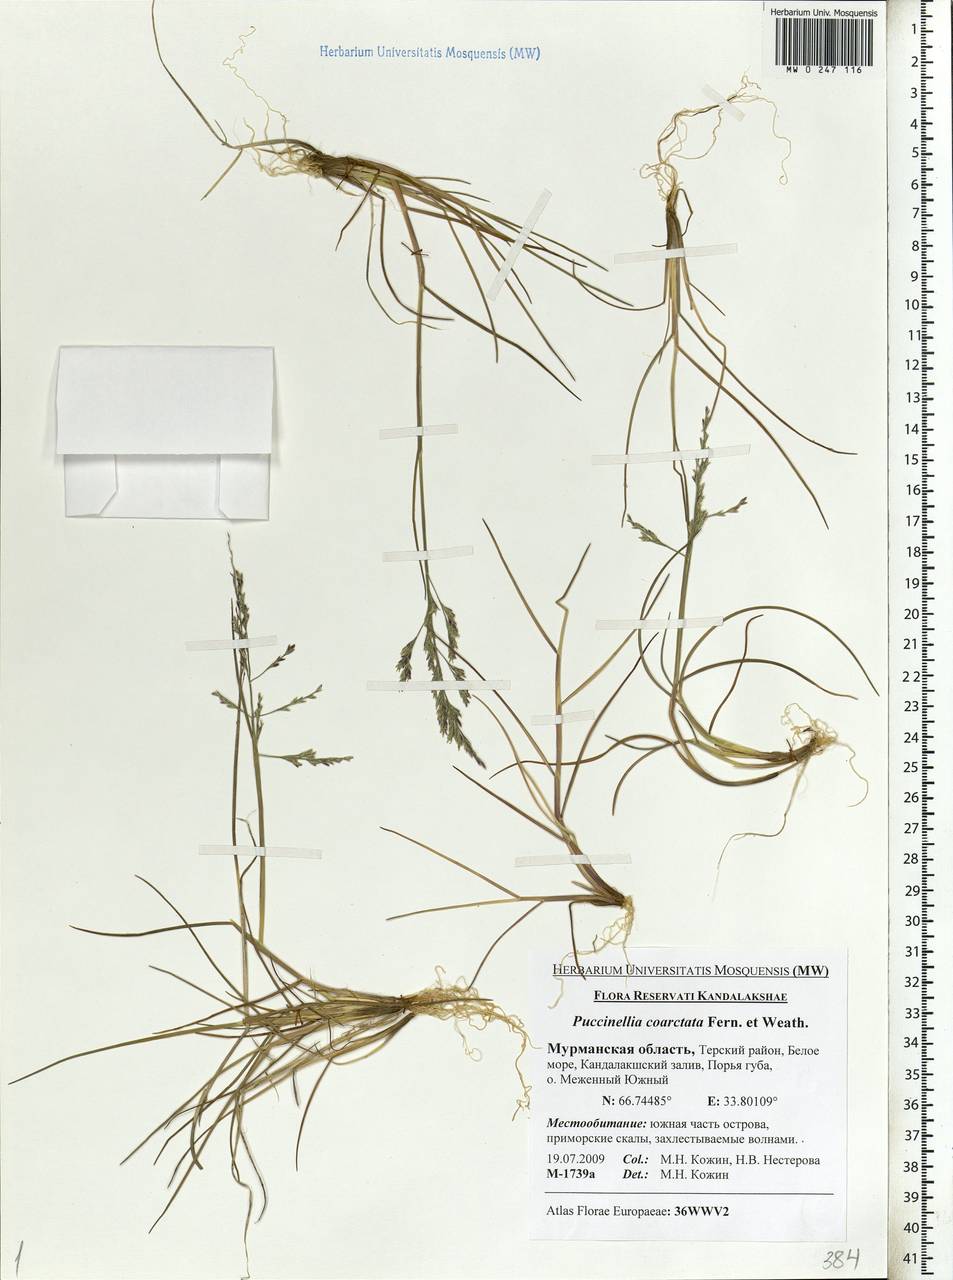 Puccinellia distans (Jacq.) Parl., Eastern Europe, Northern region (E1) (Russia)